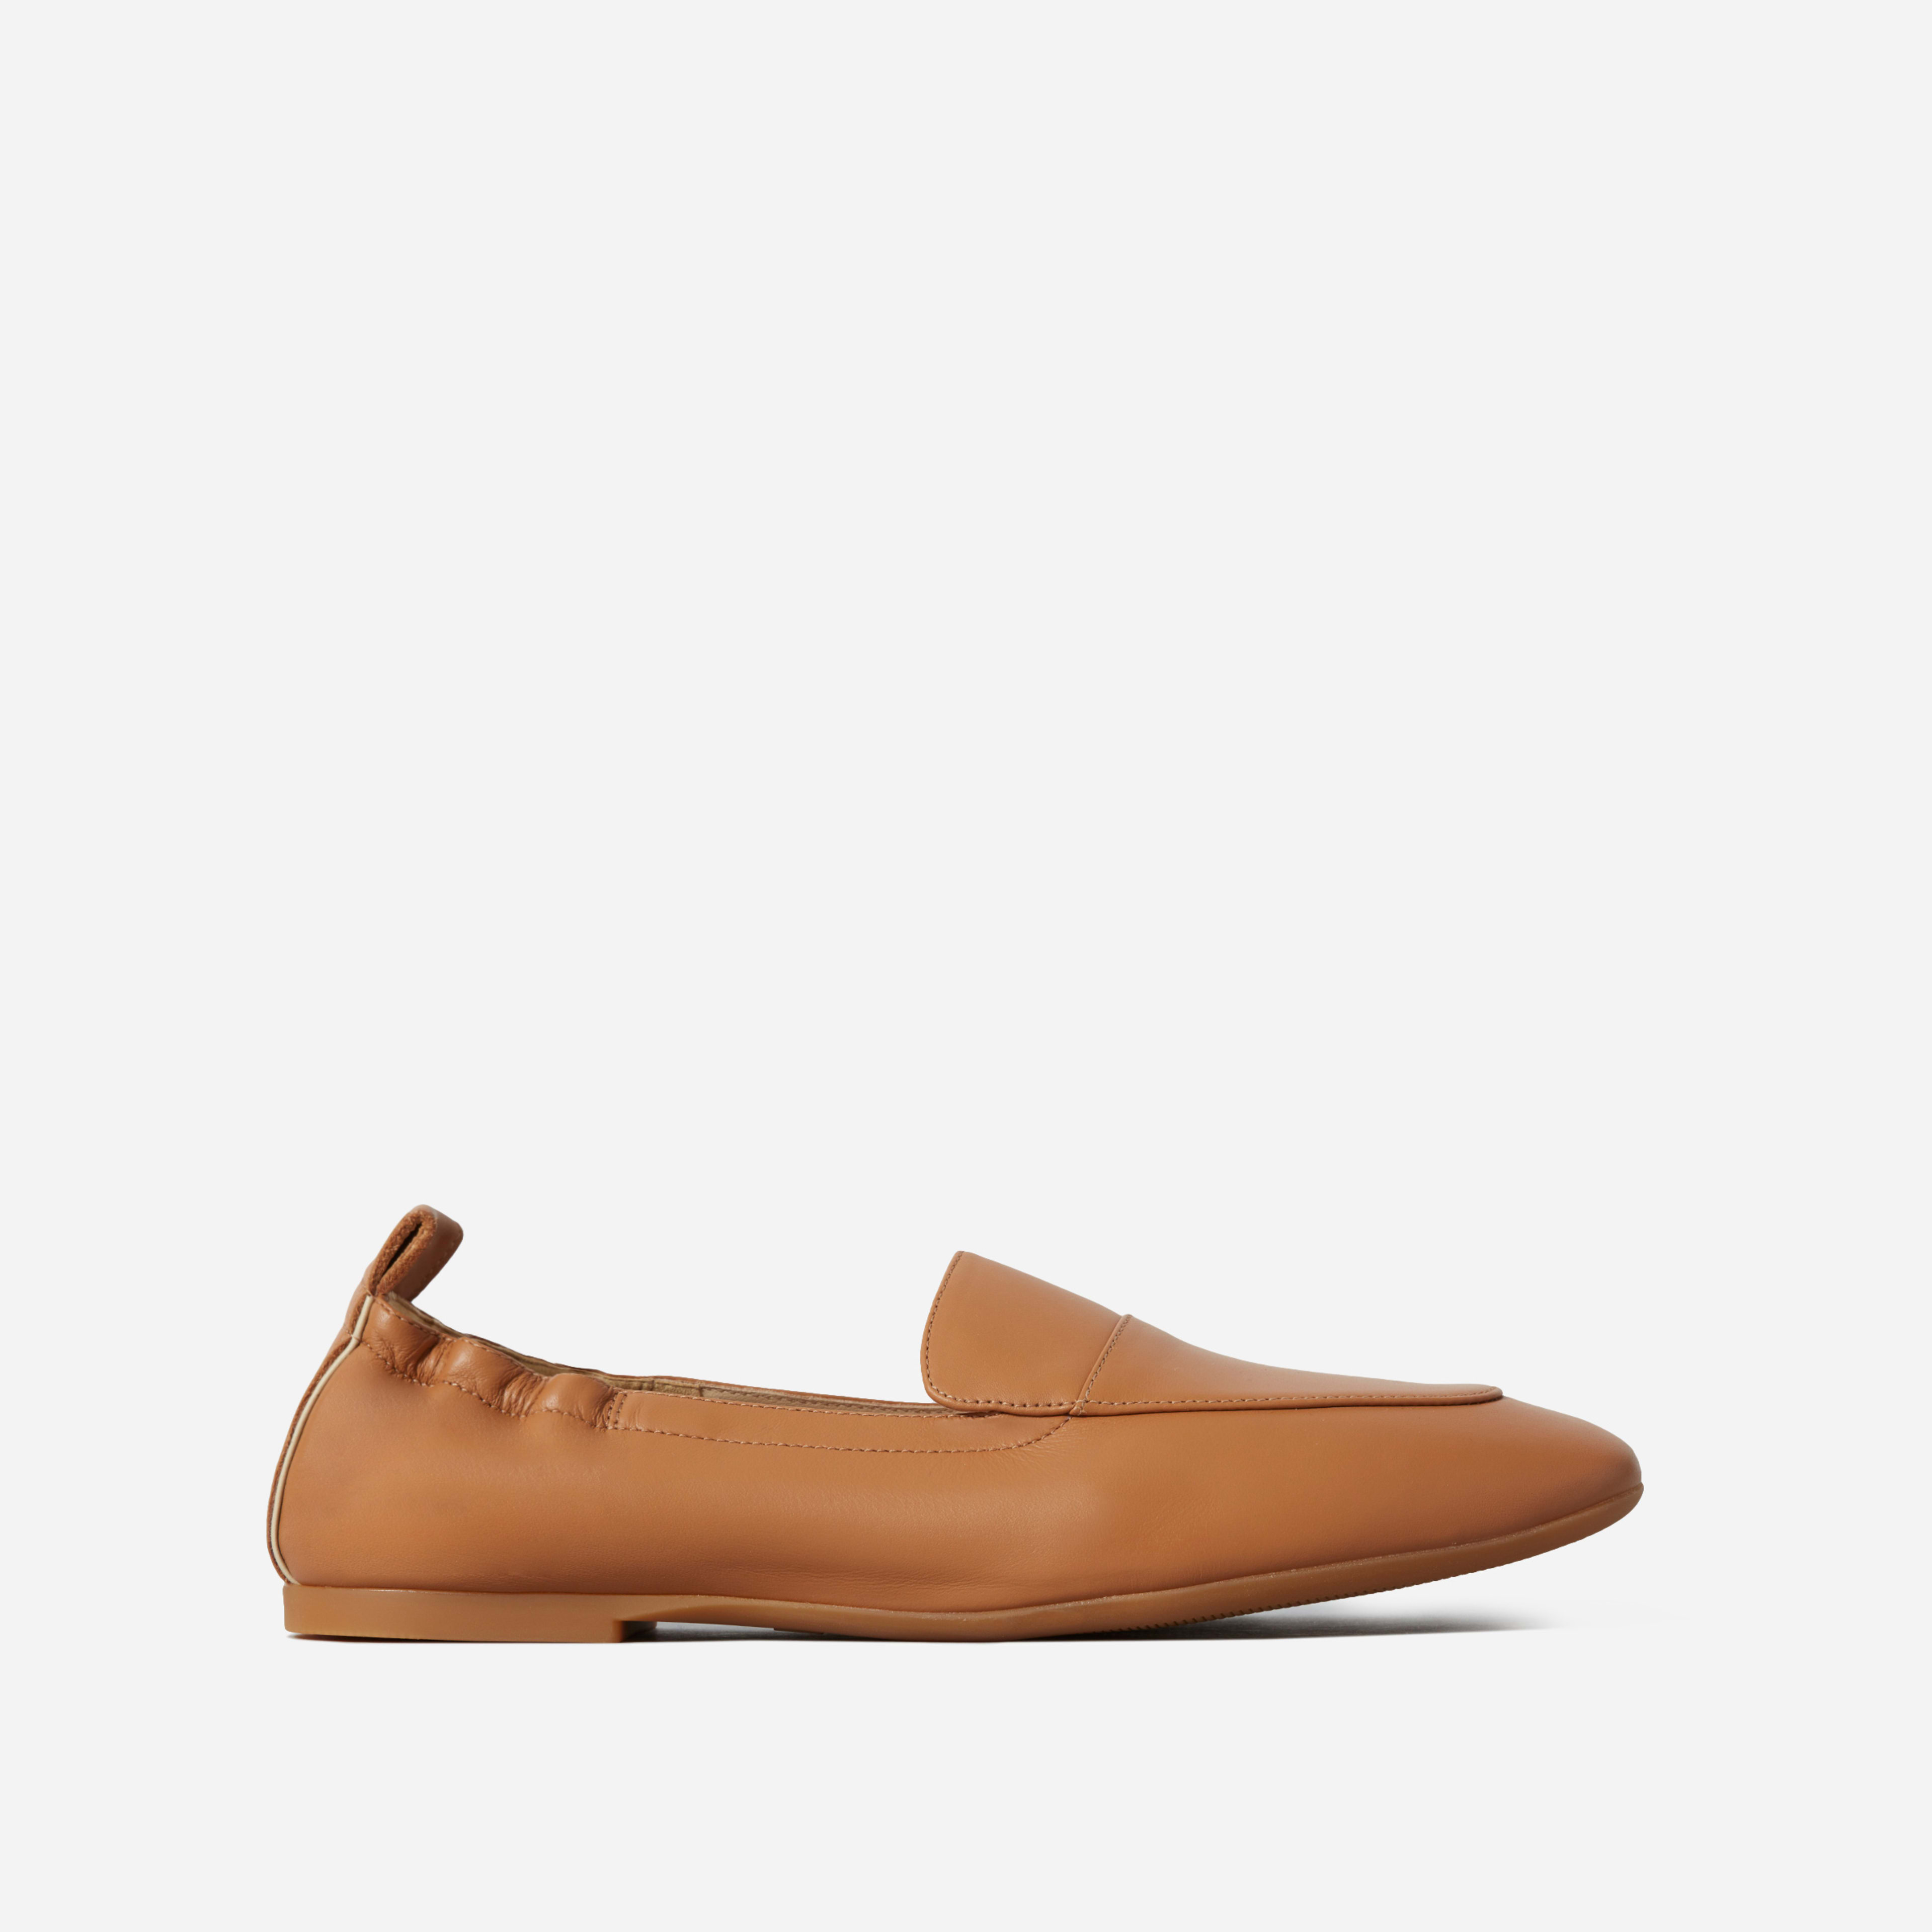 The Day Loafer - Caramel